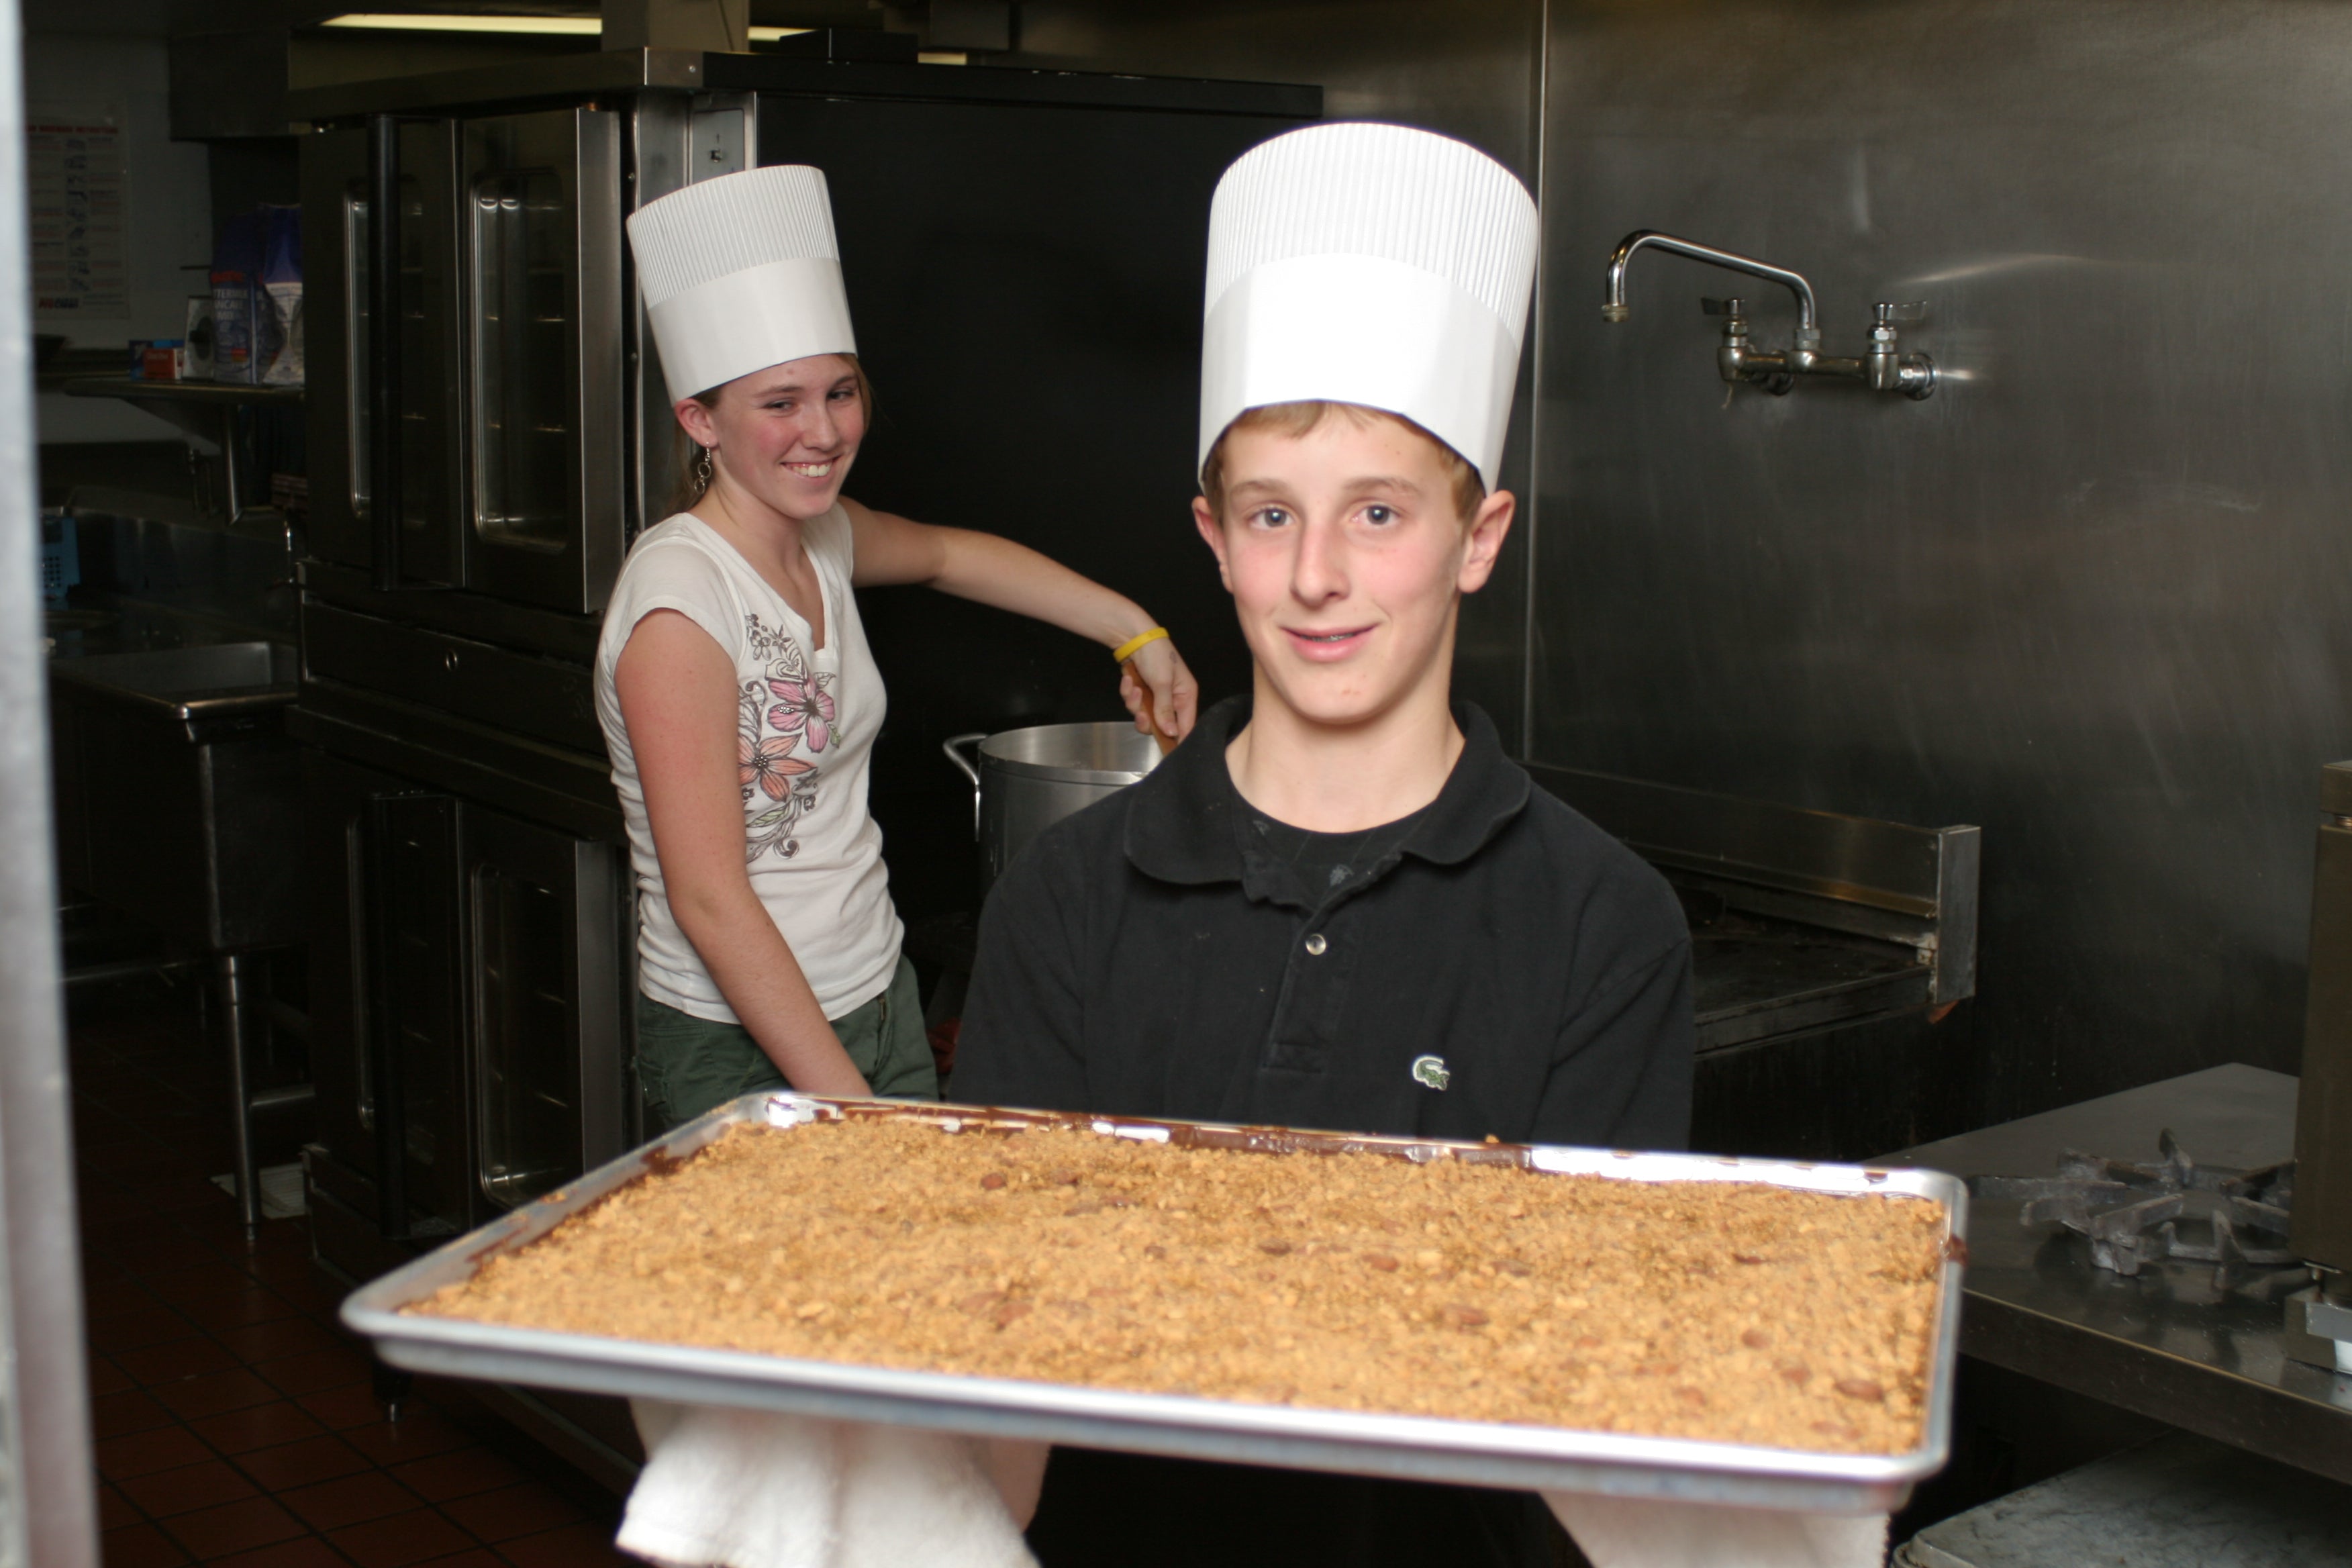 Leah Post who is on the left, stirs a pot while and Brandon Weimer on the right is displaying a tray of toffee.